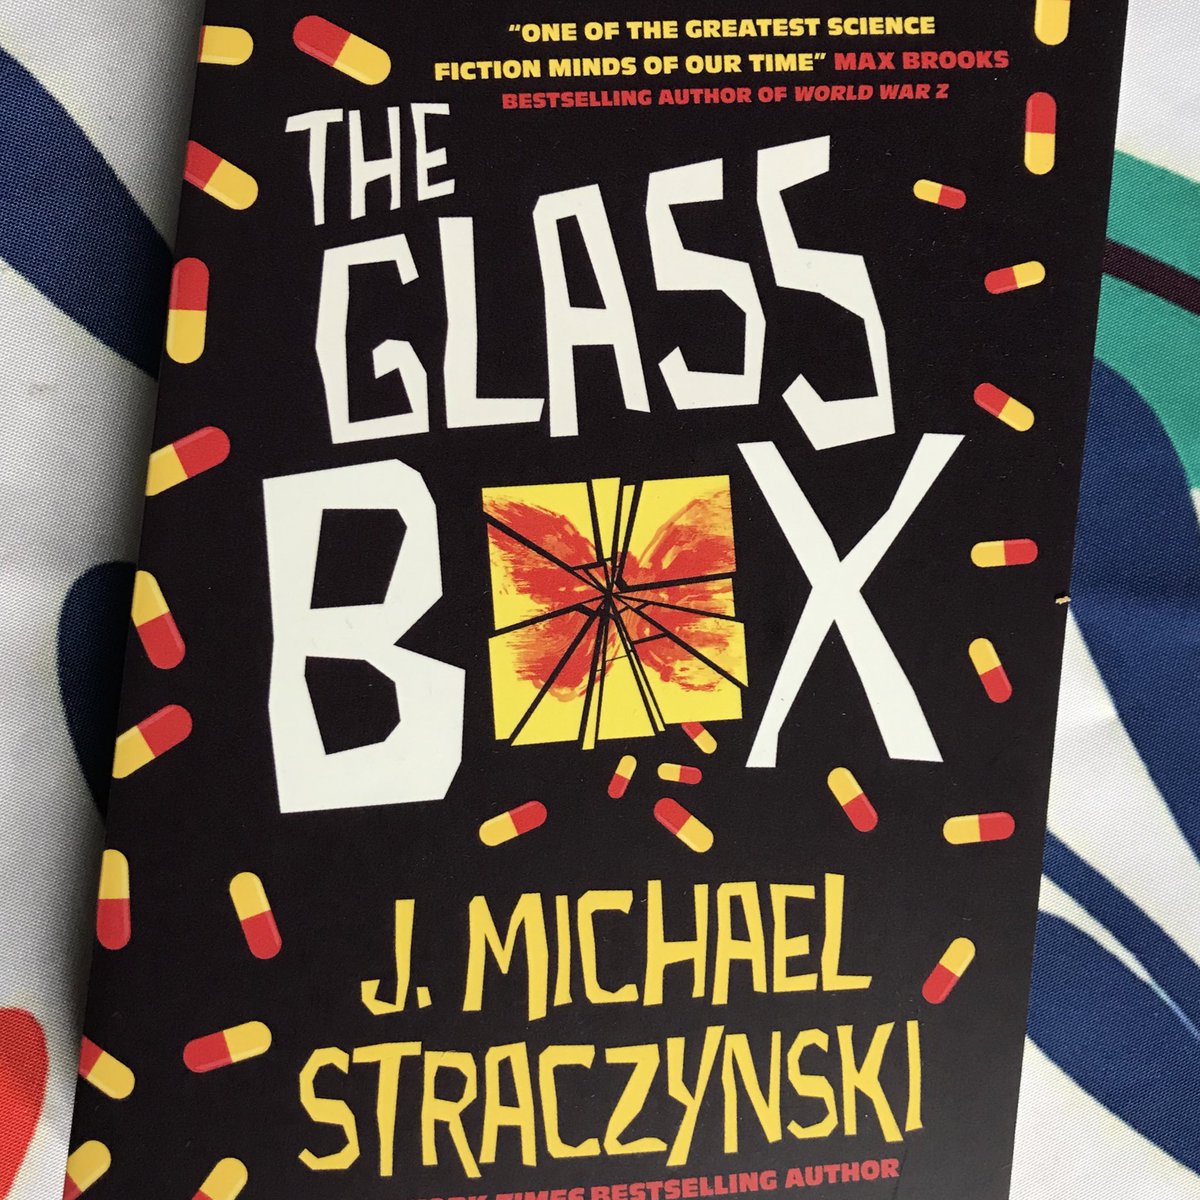 #bookmail time.

This one came as a surprise but I look forward to reading it.

‘The Glass Box’ by @straczynski is out now and I am looking for a spot in the @sfbook schedule to fit it!

Thank you @TitanBooks @baharkutluk91 1/4